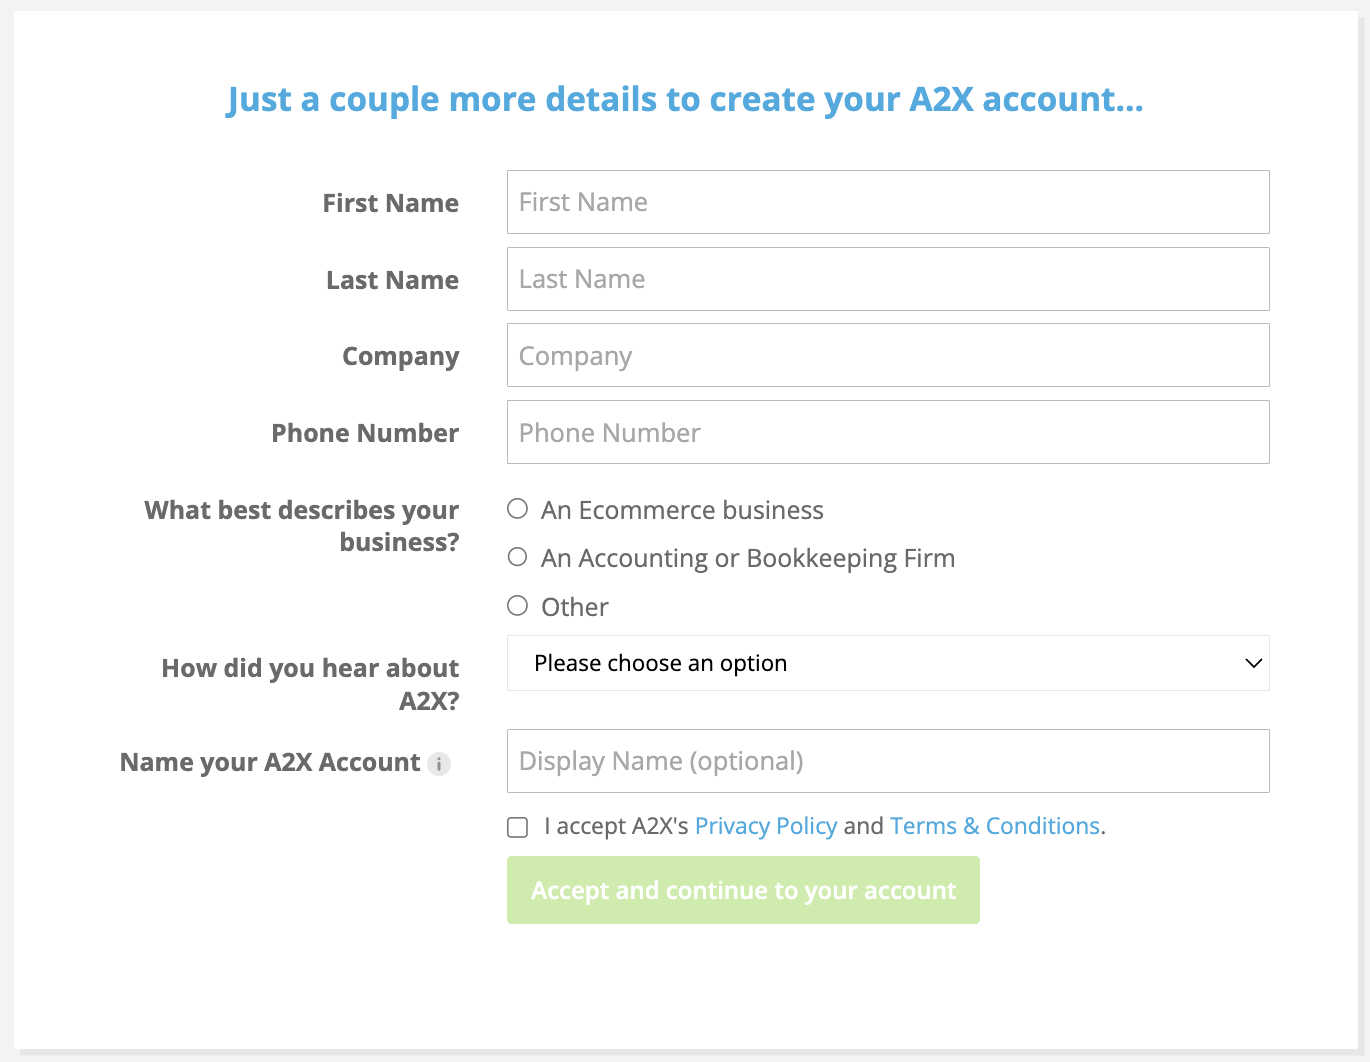 screenshot of the A2X sign up page and details needed, including name, company name, phone number, and description of business